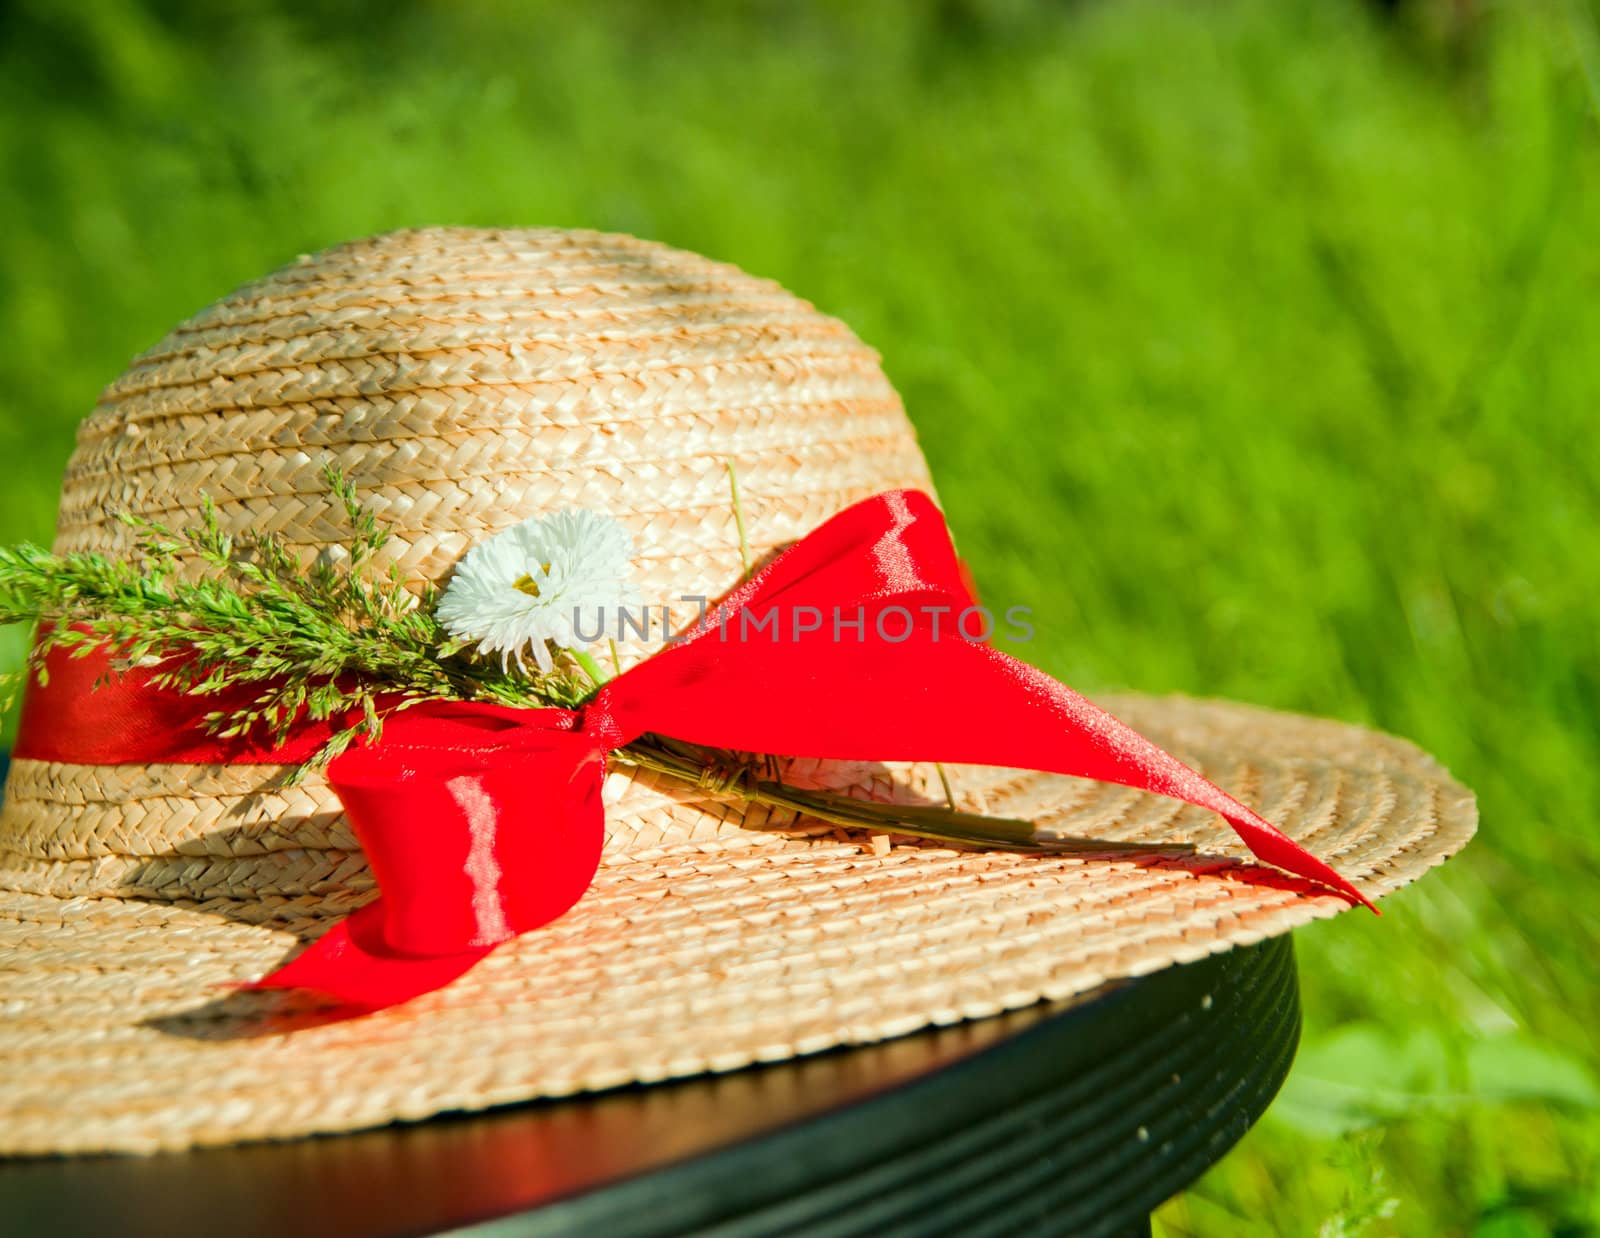 Old straw hat with red ribbon in the grass